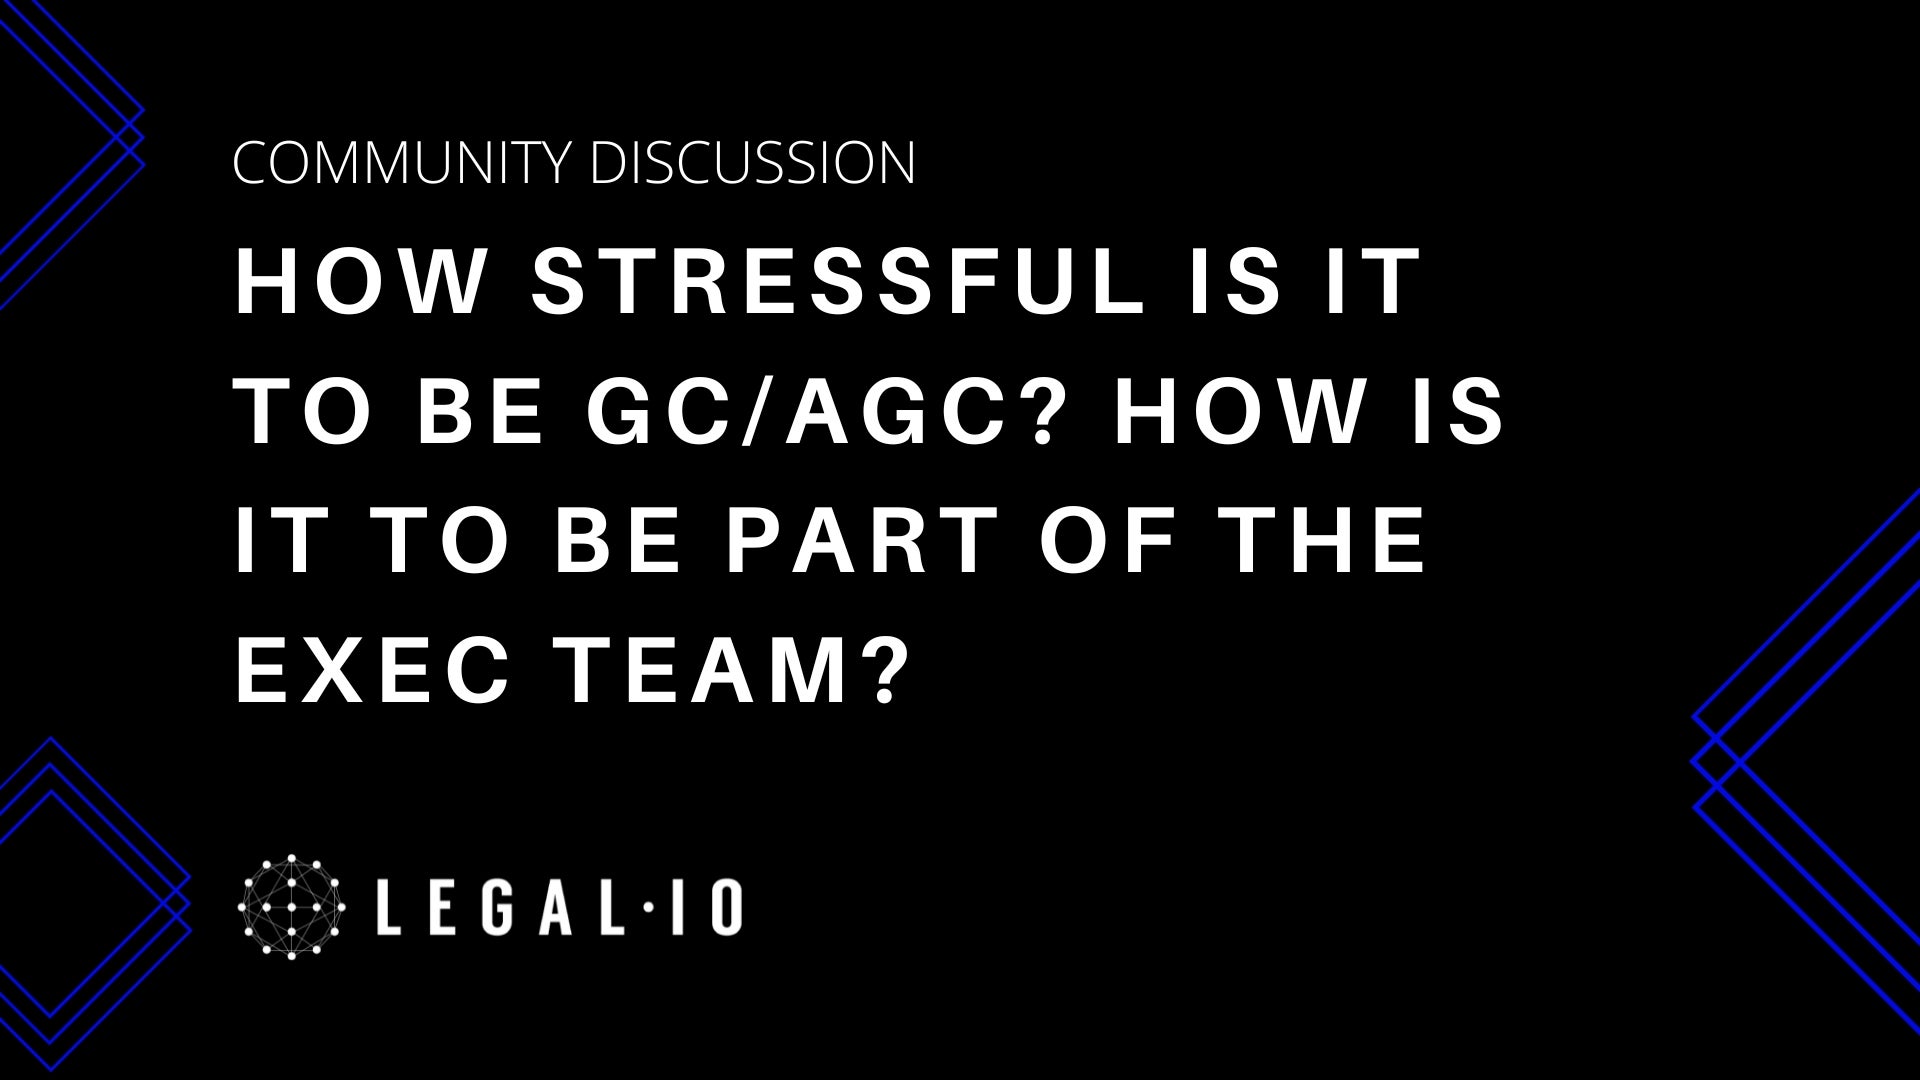 Community Perspectives: How stressful is it to be GC/AGC? How is it to be part of the exec team? Do you feel supported/valued in that team?